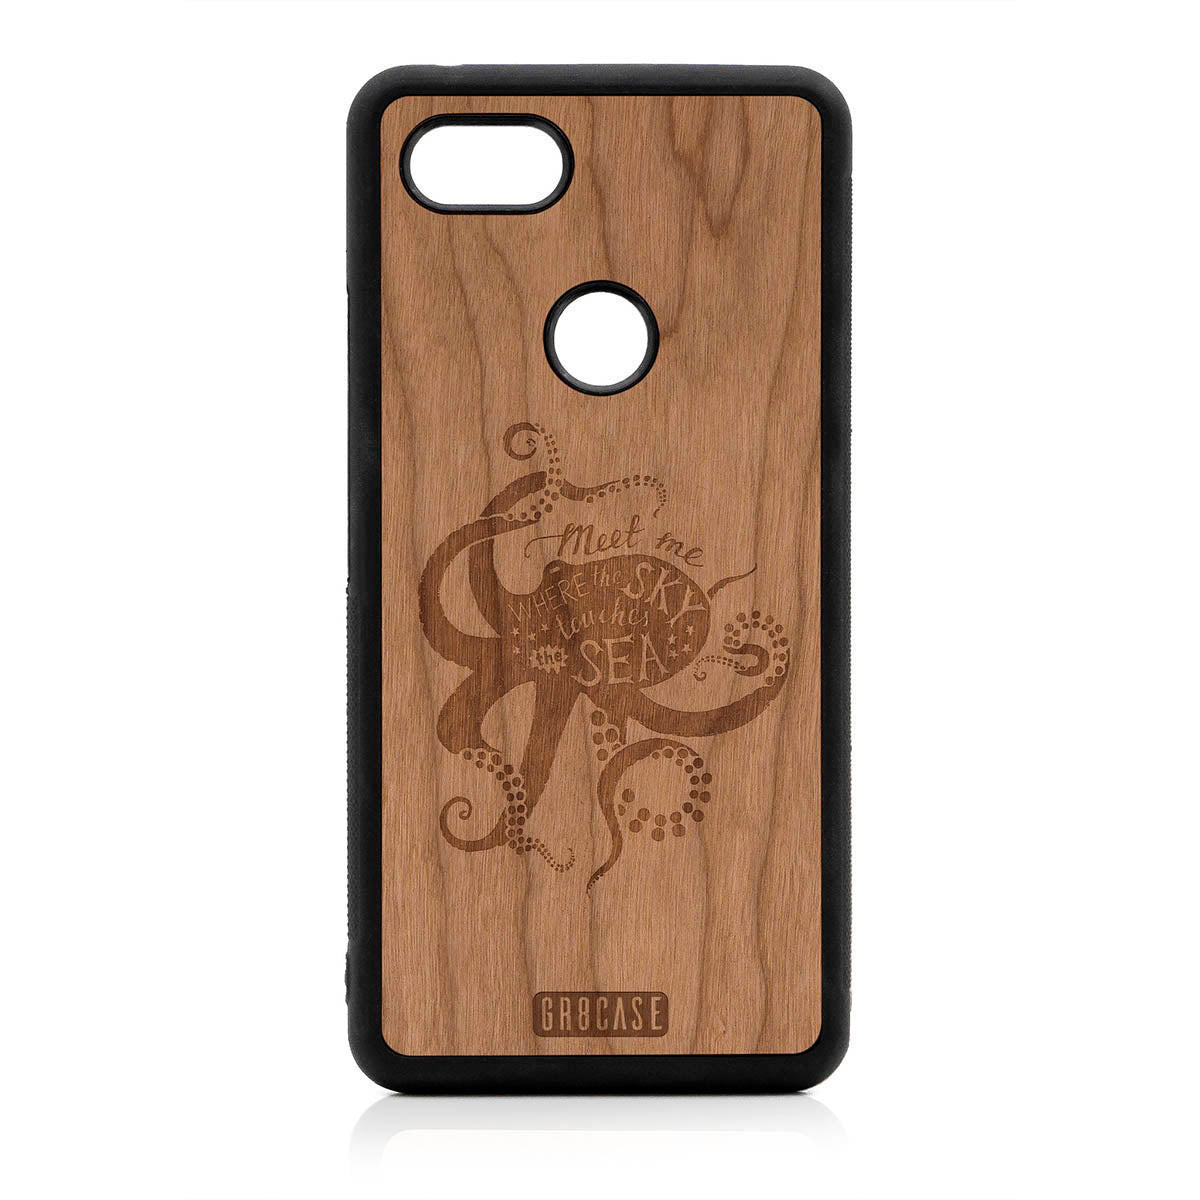 Meet Me Where The Sky Touches The Sea (Octopus) Design Wood Case For Google Pixel 3 XL